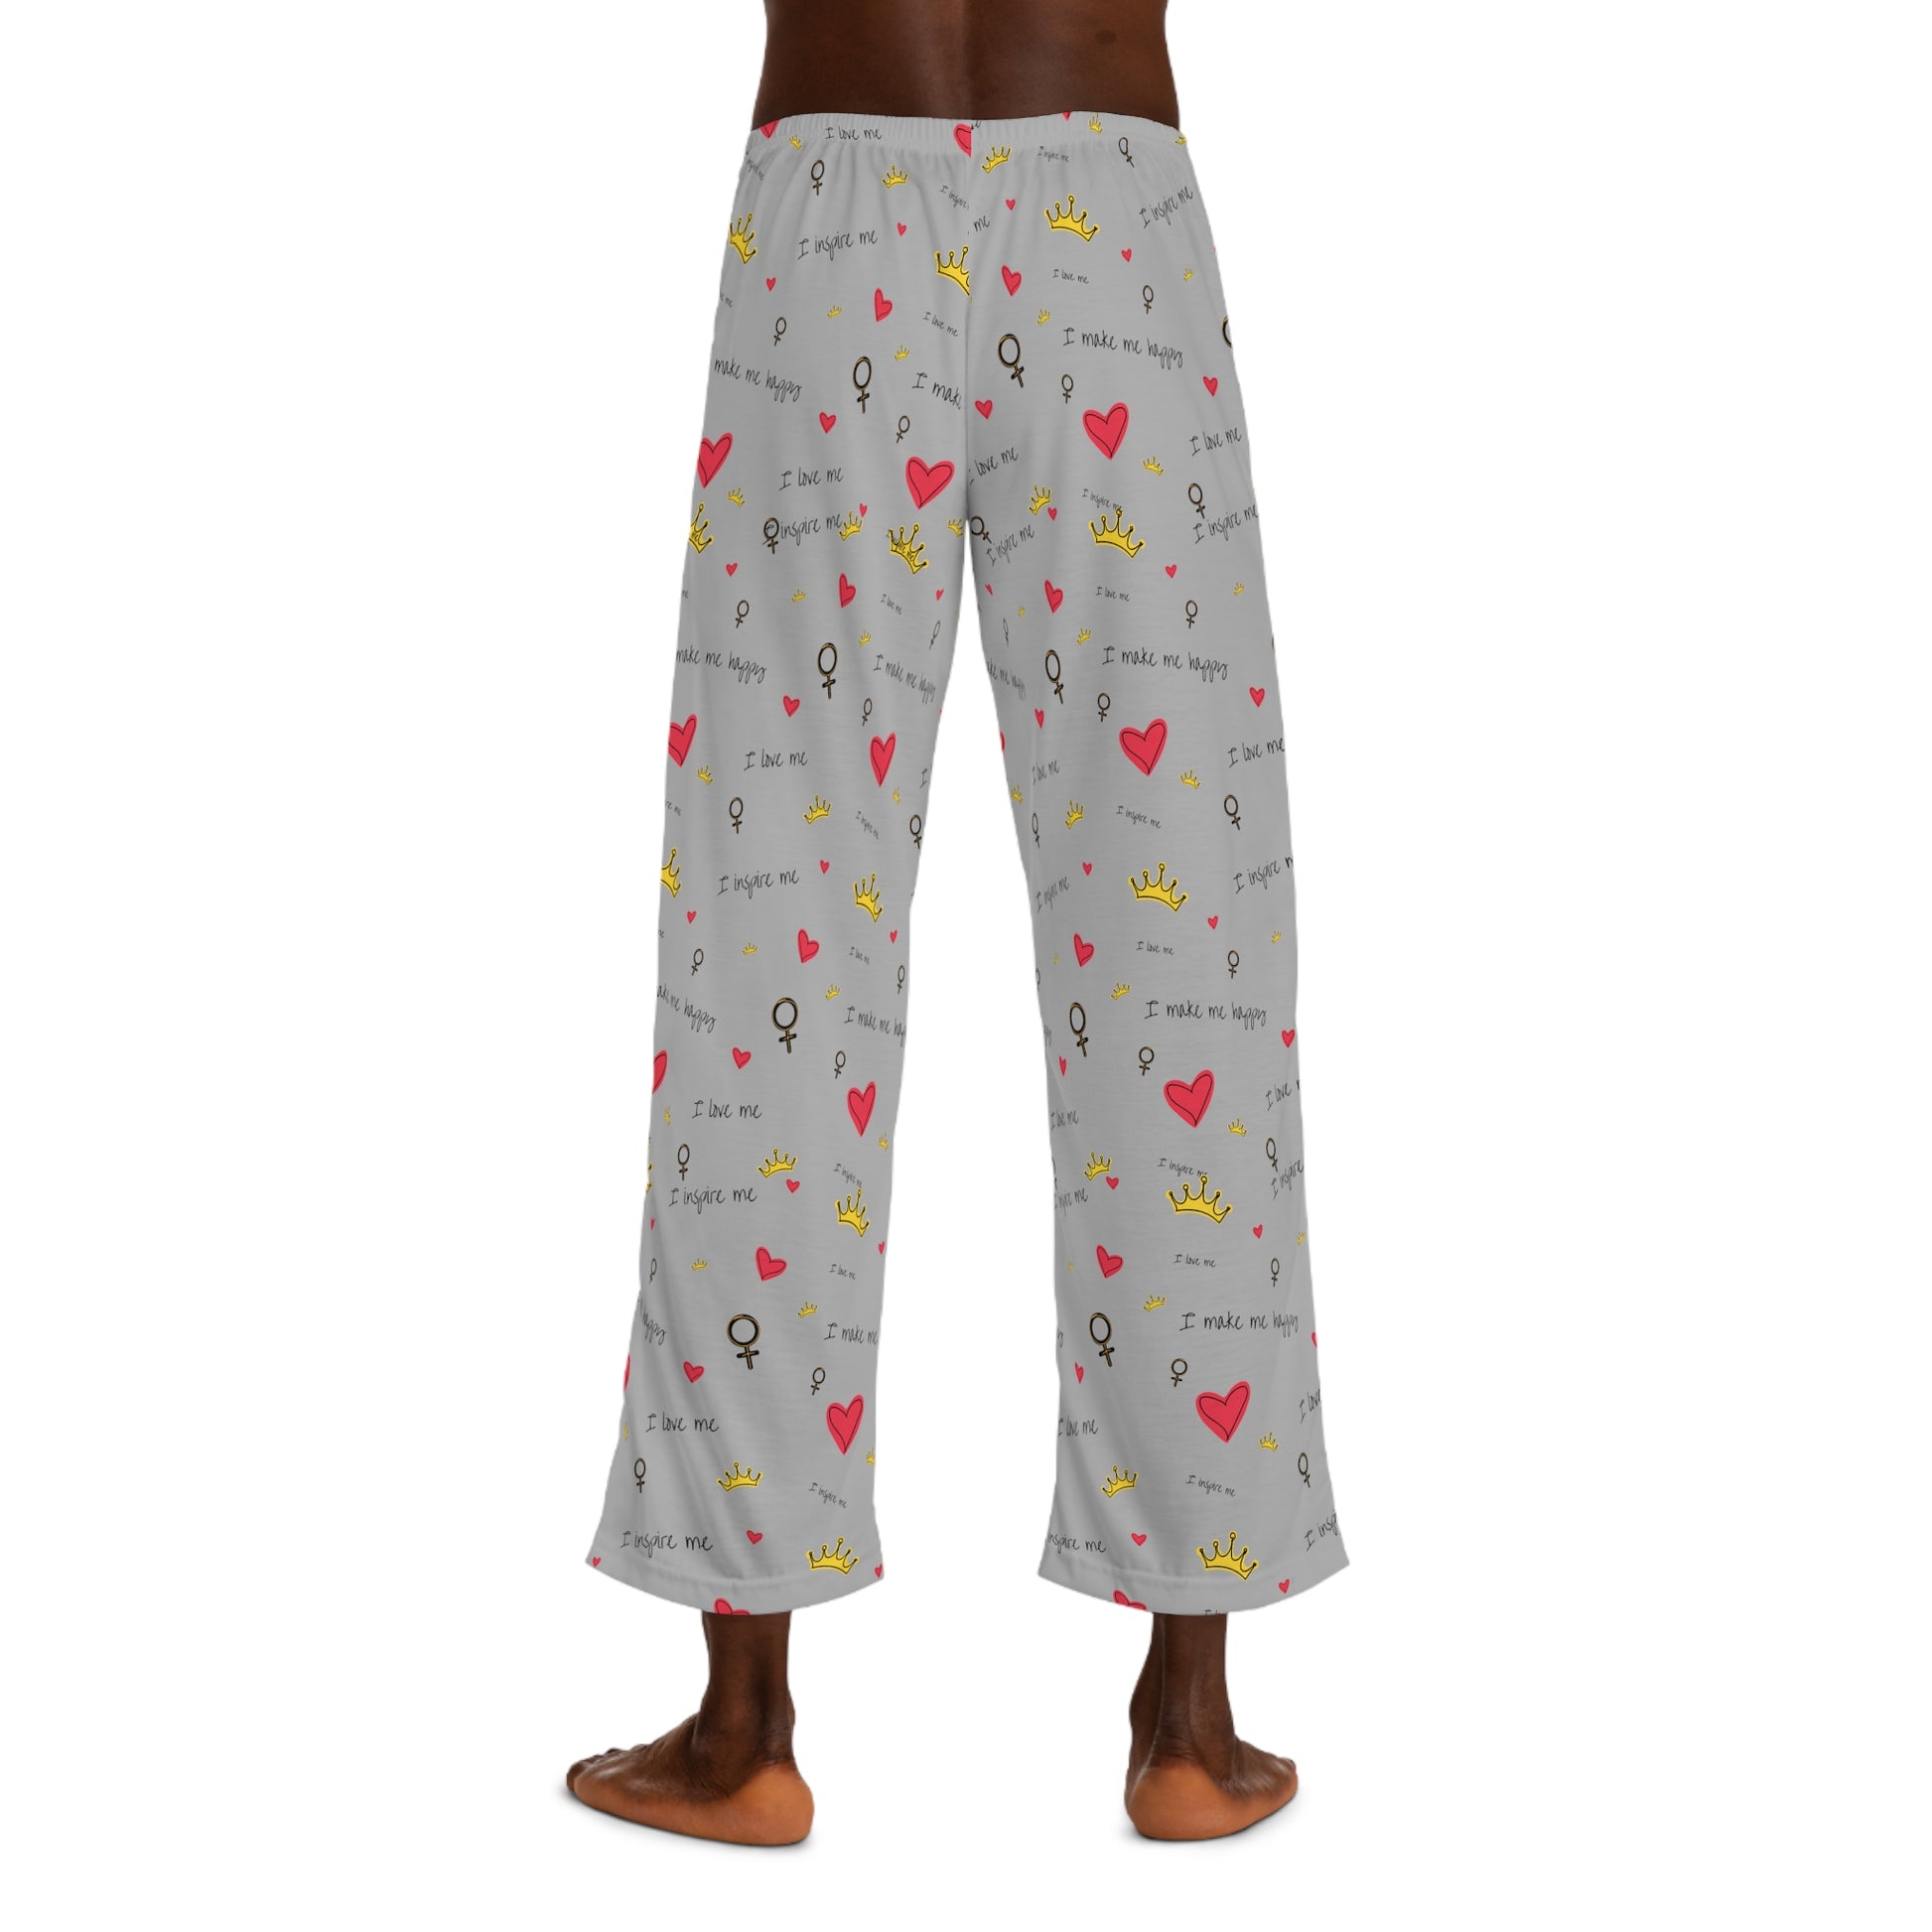 A man wearing Printify Men's Pajama Pants: Polyester jersey; Relaxed fit; Elastic; Drawstring with hearts on them.